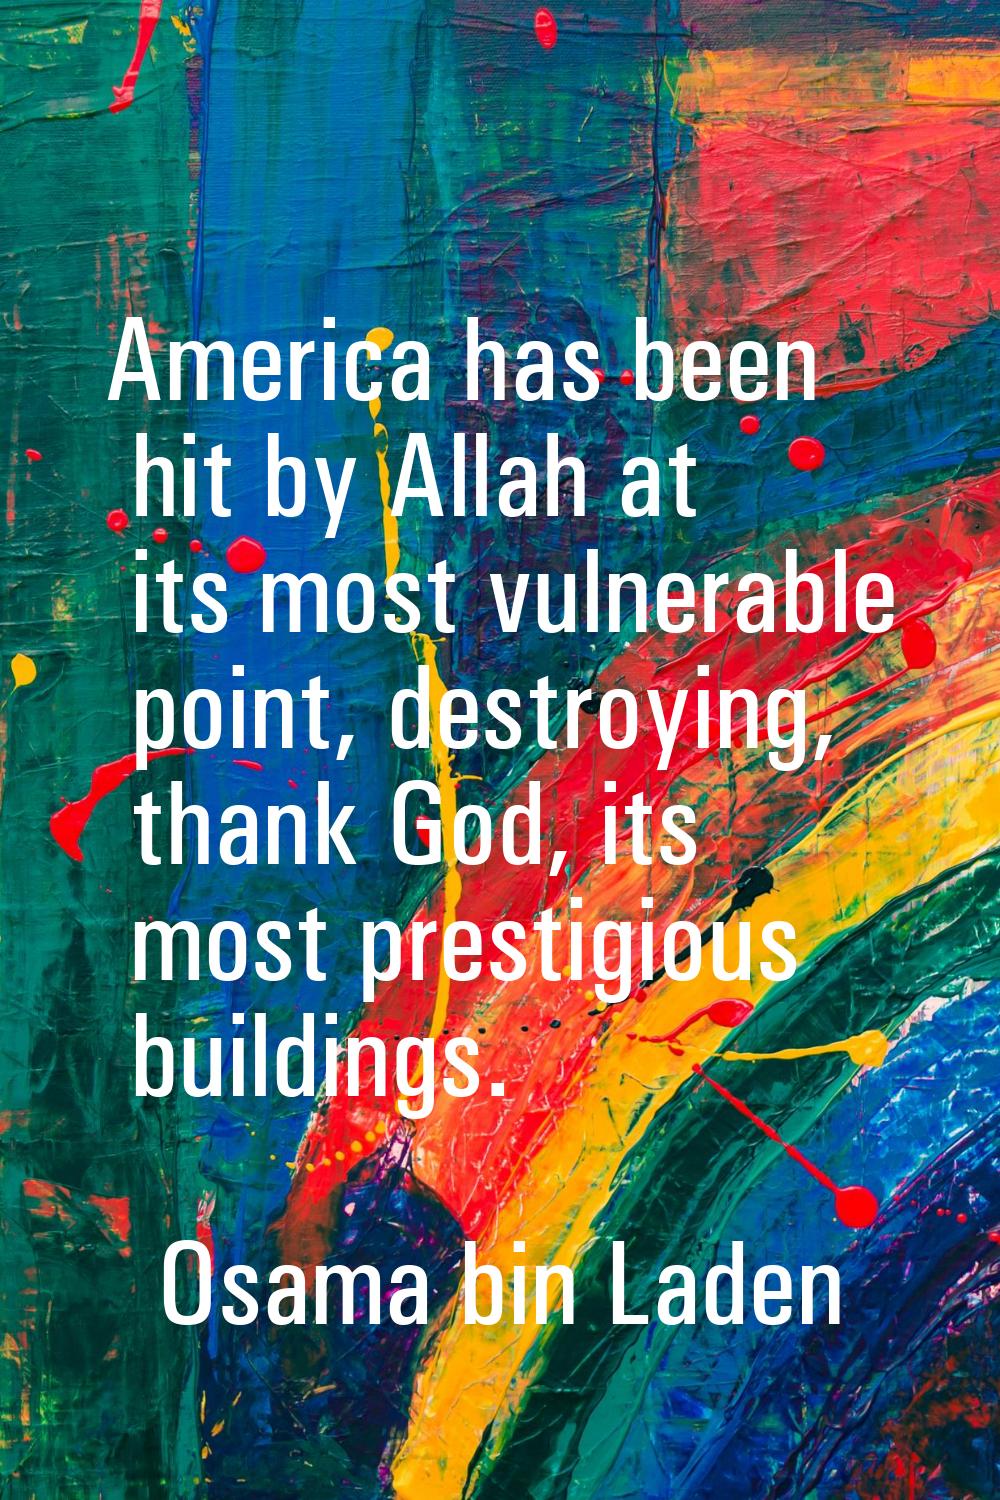 America has been hit by Allah at its most vulnerable point, destroying, thank God, its most prestig